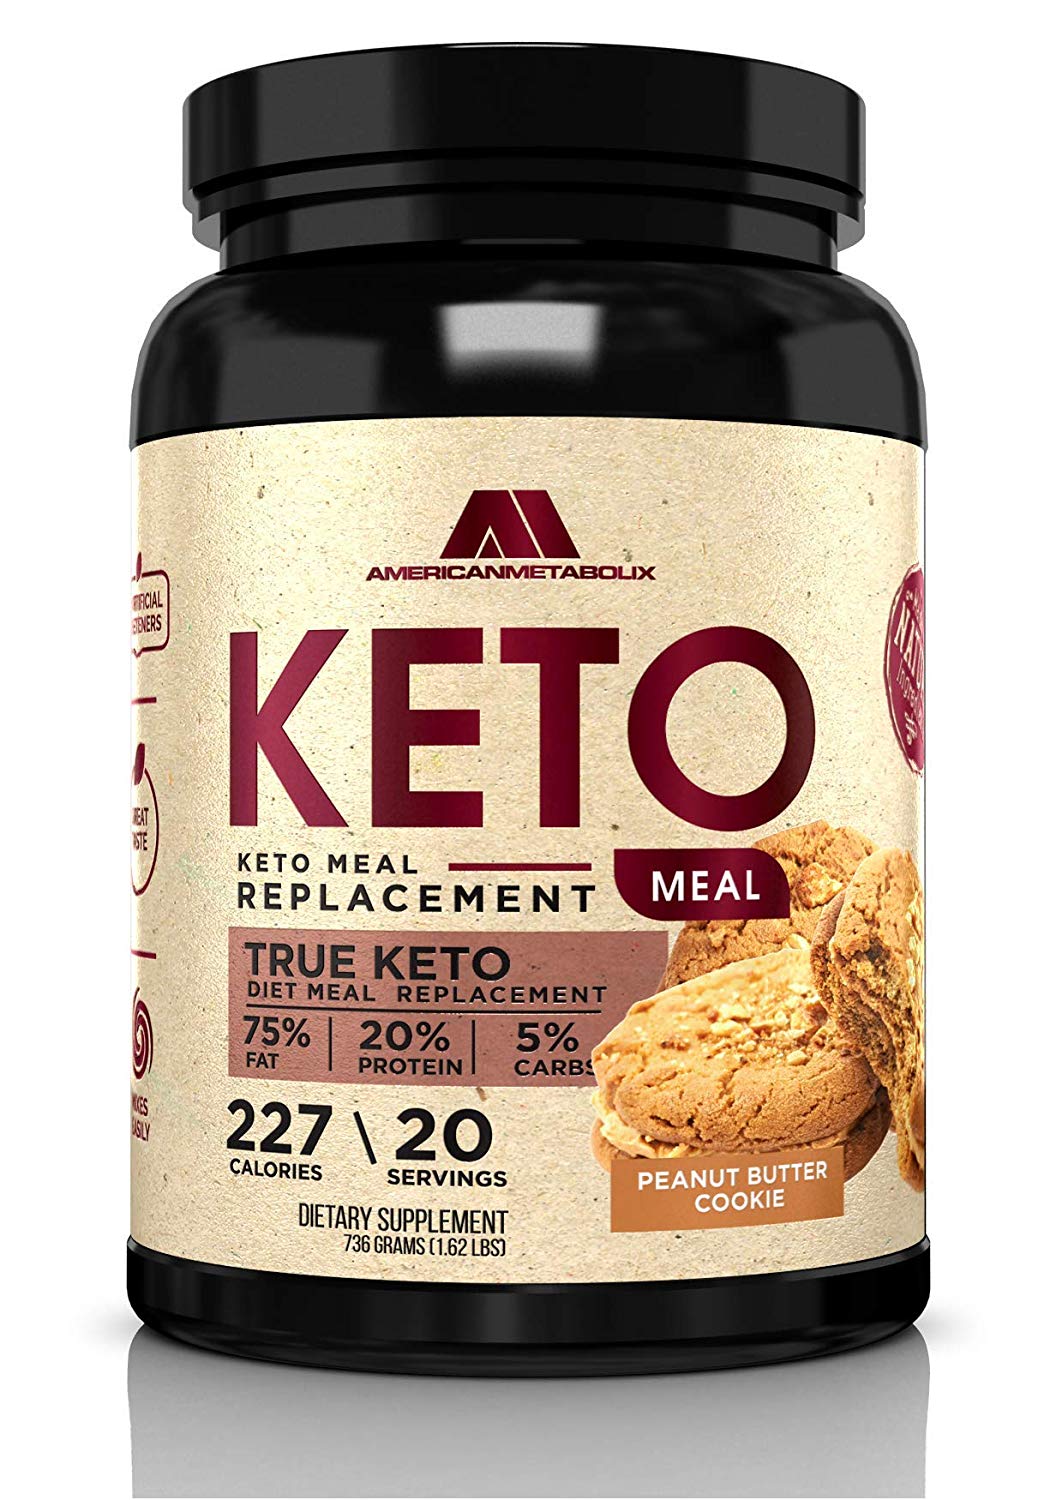 Keto Meal Replacement, 20 Servings, 227 Calories, 75% F,20% p, 5% c (20 Servings) (Peanut Butter Cookie)